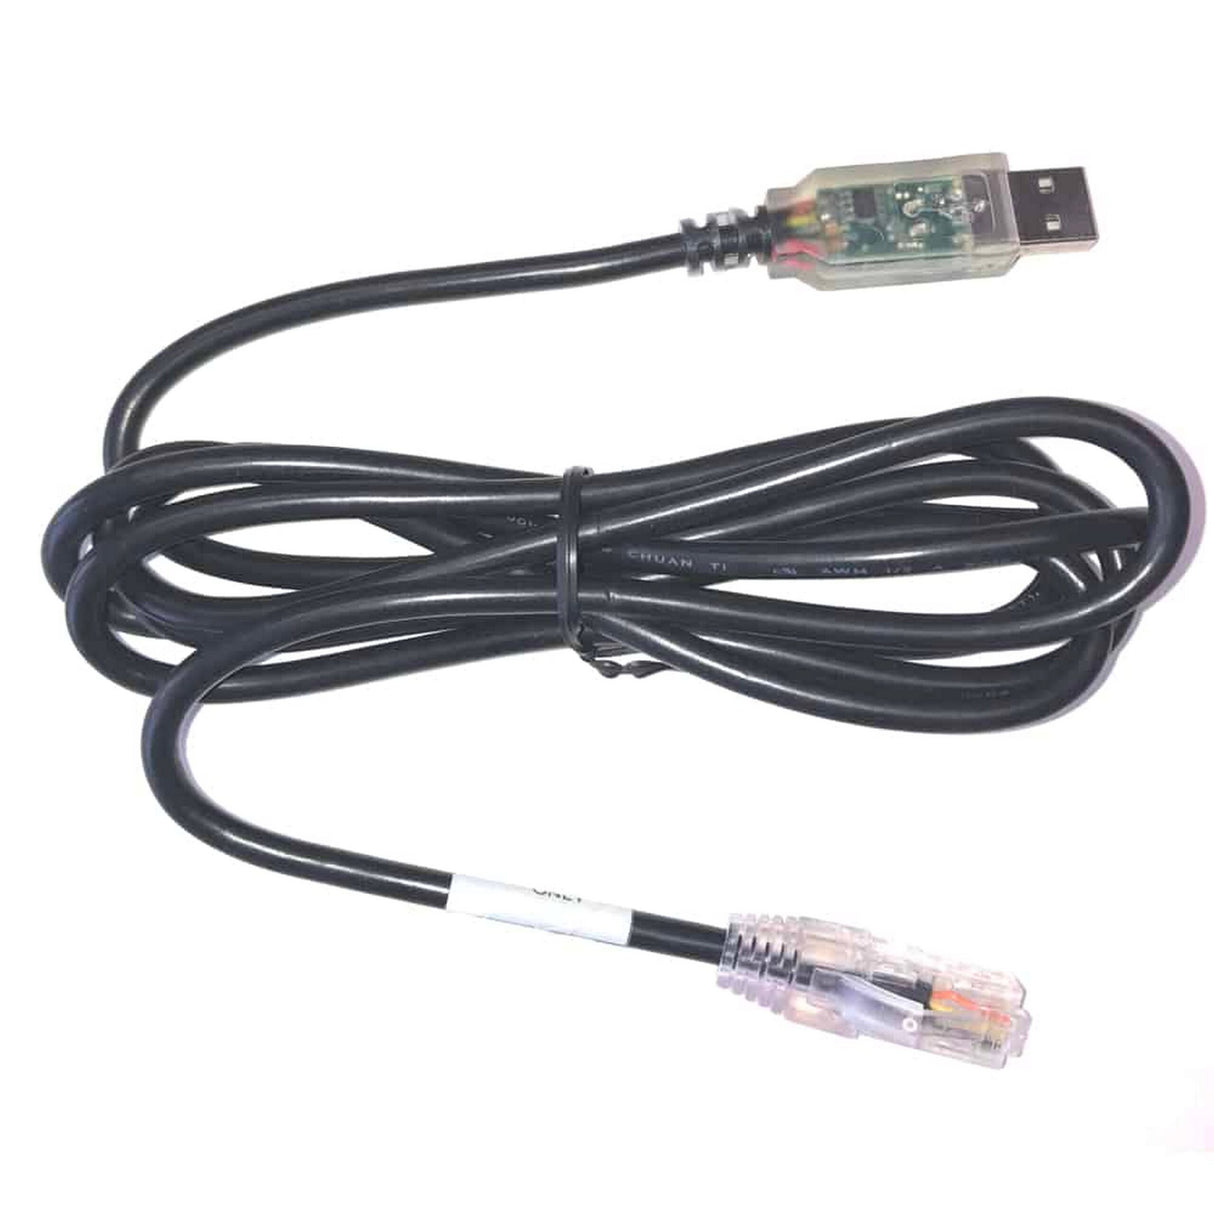 DSAN KES-485-PC USB Serial Cable for PerfectCue